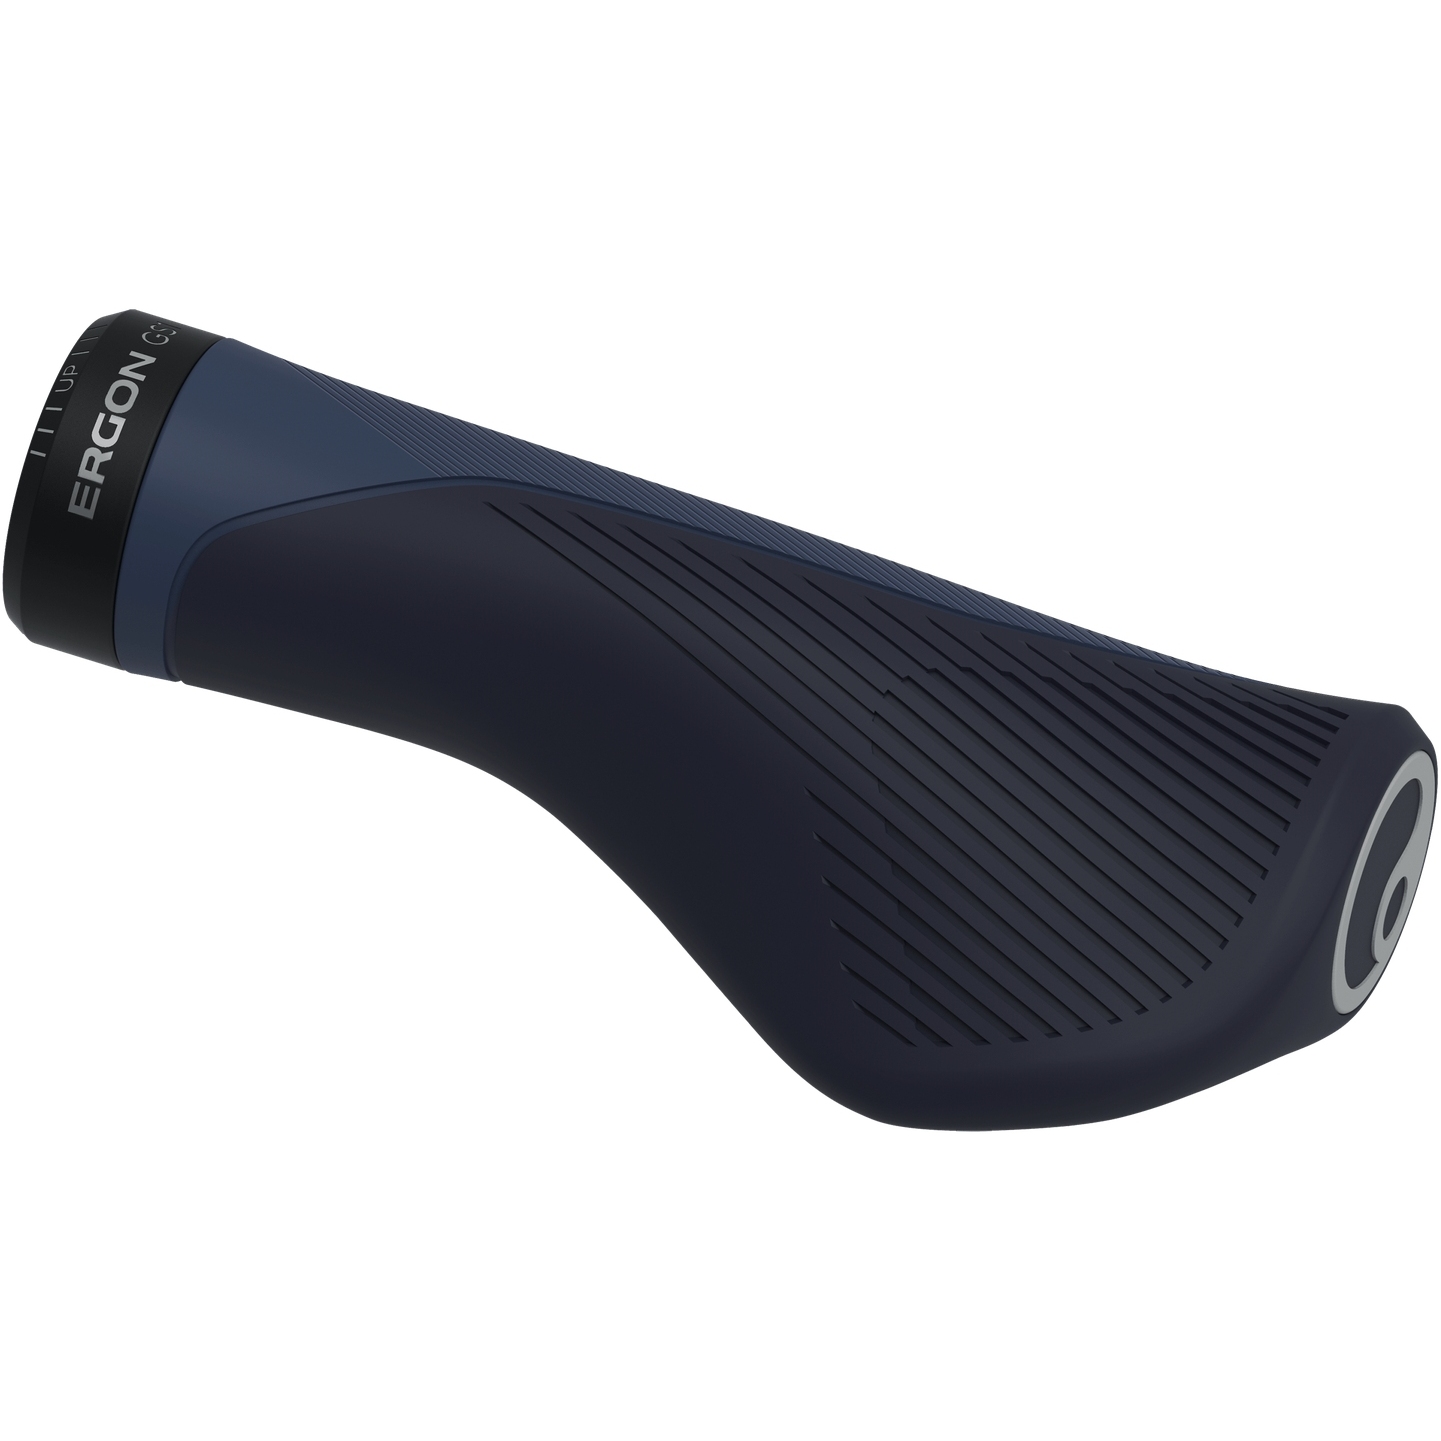 Picture of Ergon GS1 Evo Small Bar Grips - blue